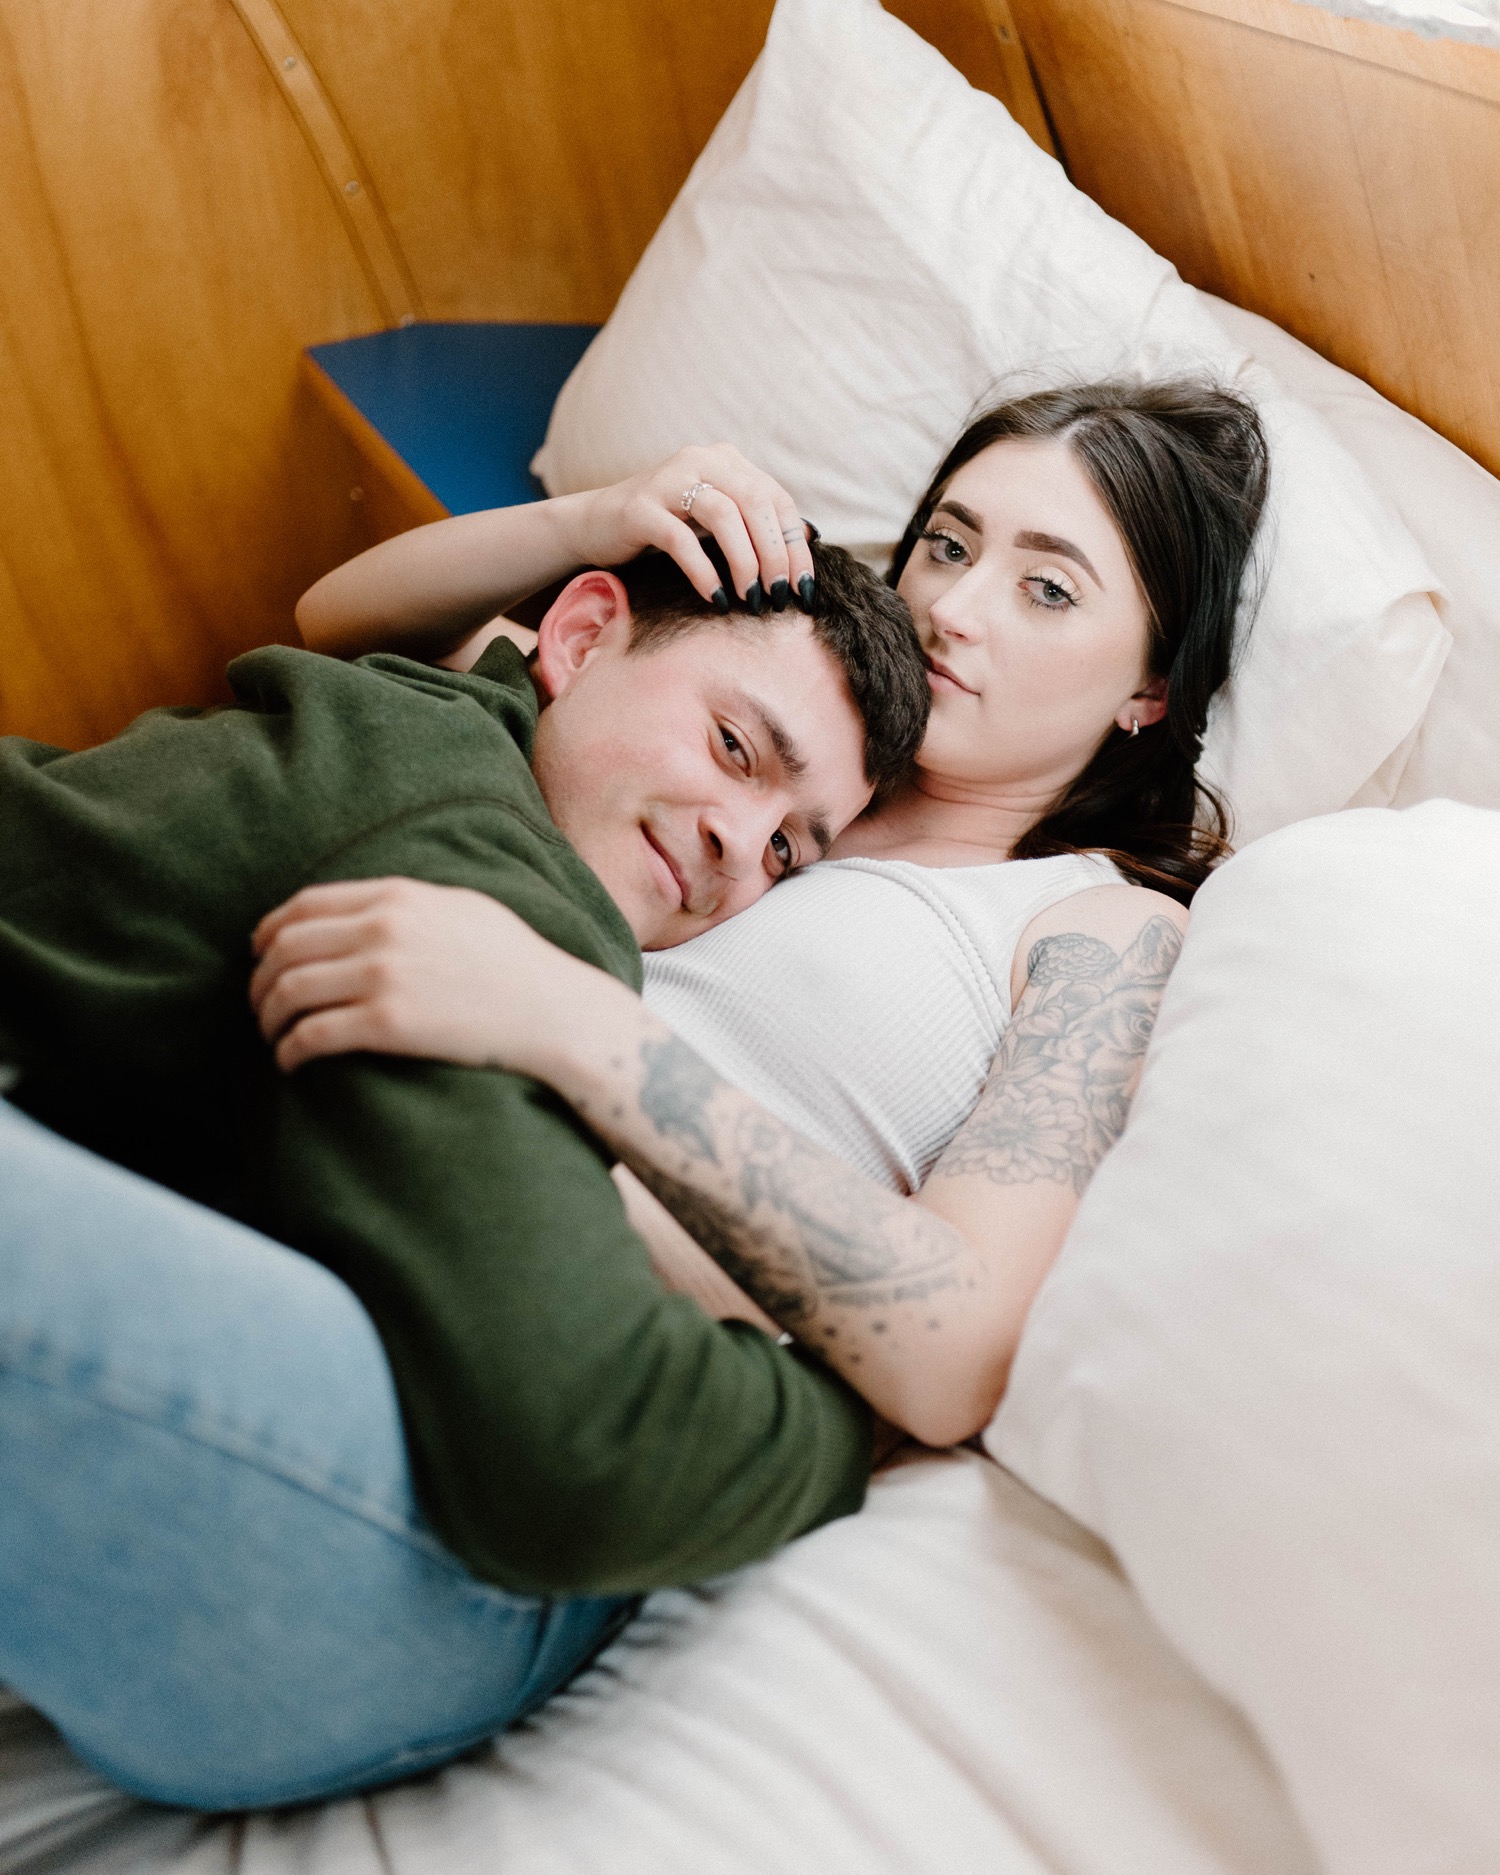 Cozy couples in home session posing on bed/couch. Photo by Erika Greene  Photography. | Couples, Couples in love, Couples engagement photos